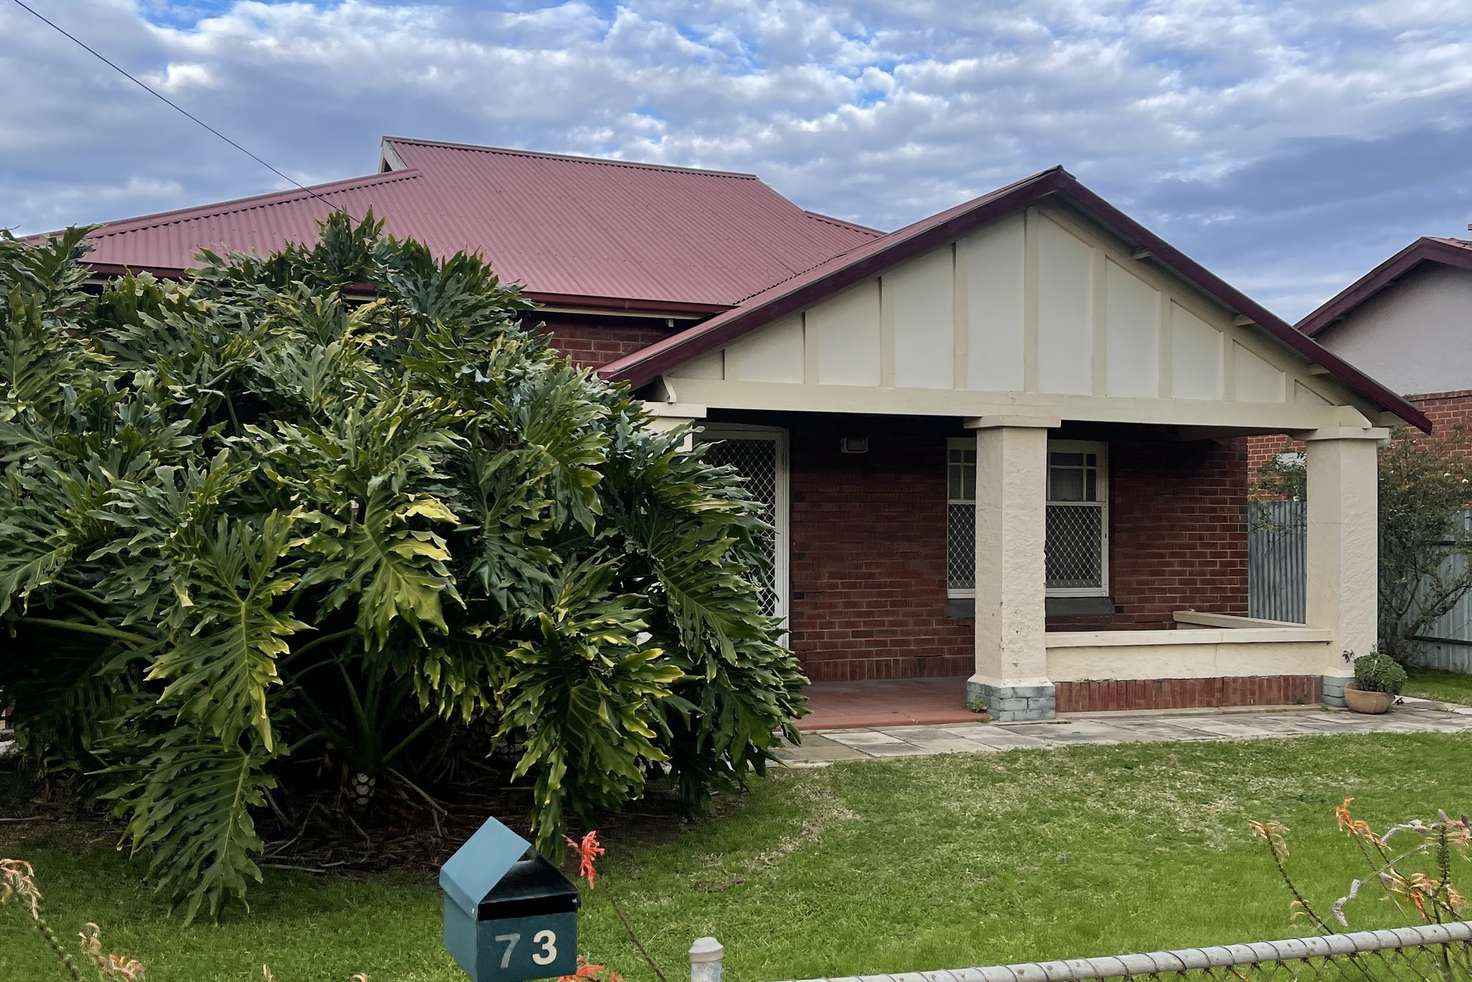 Main view of Homely house listing, 73 William street, Beverley SA 5009